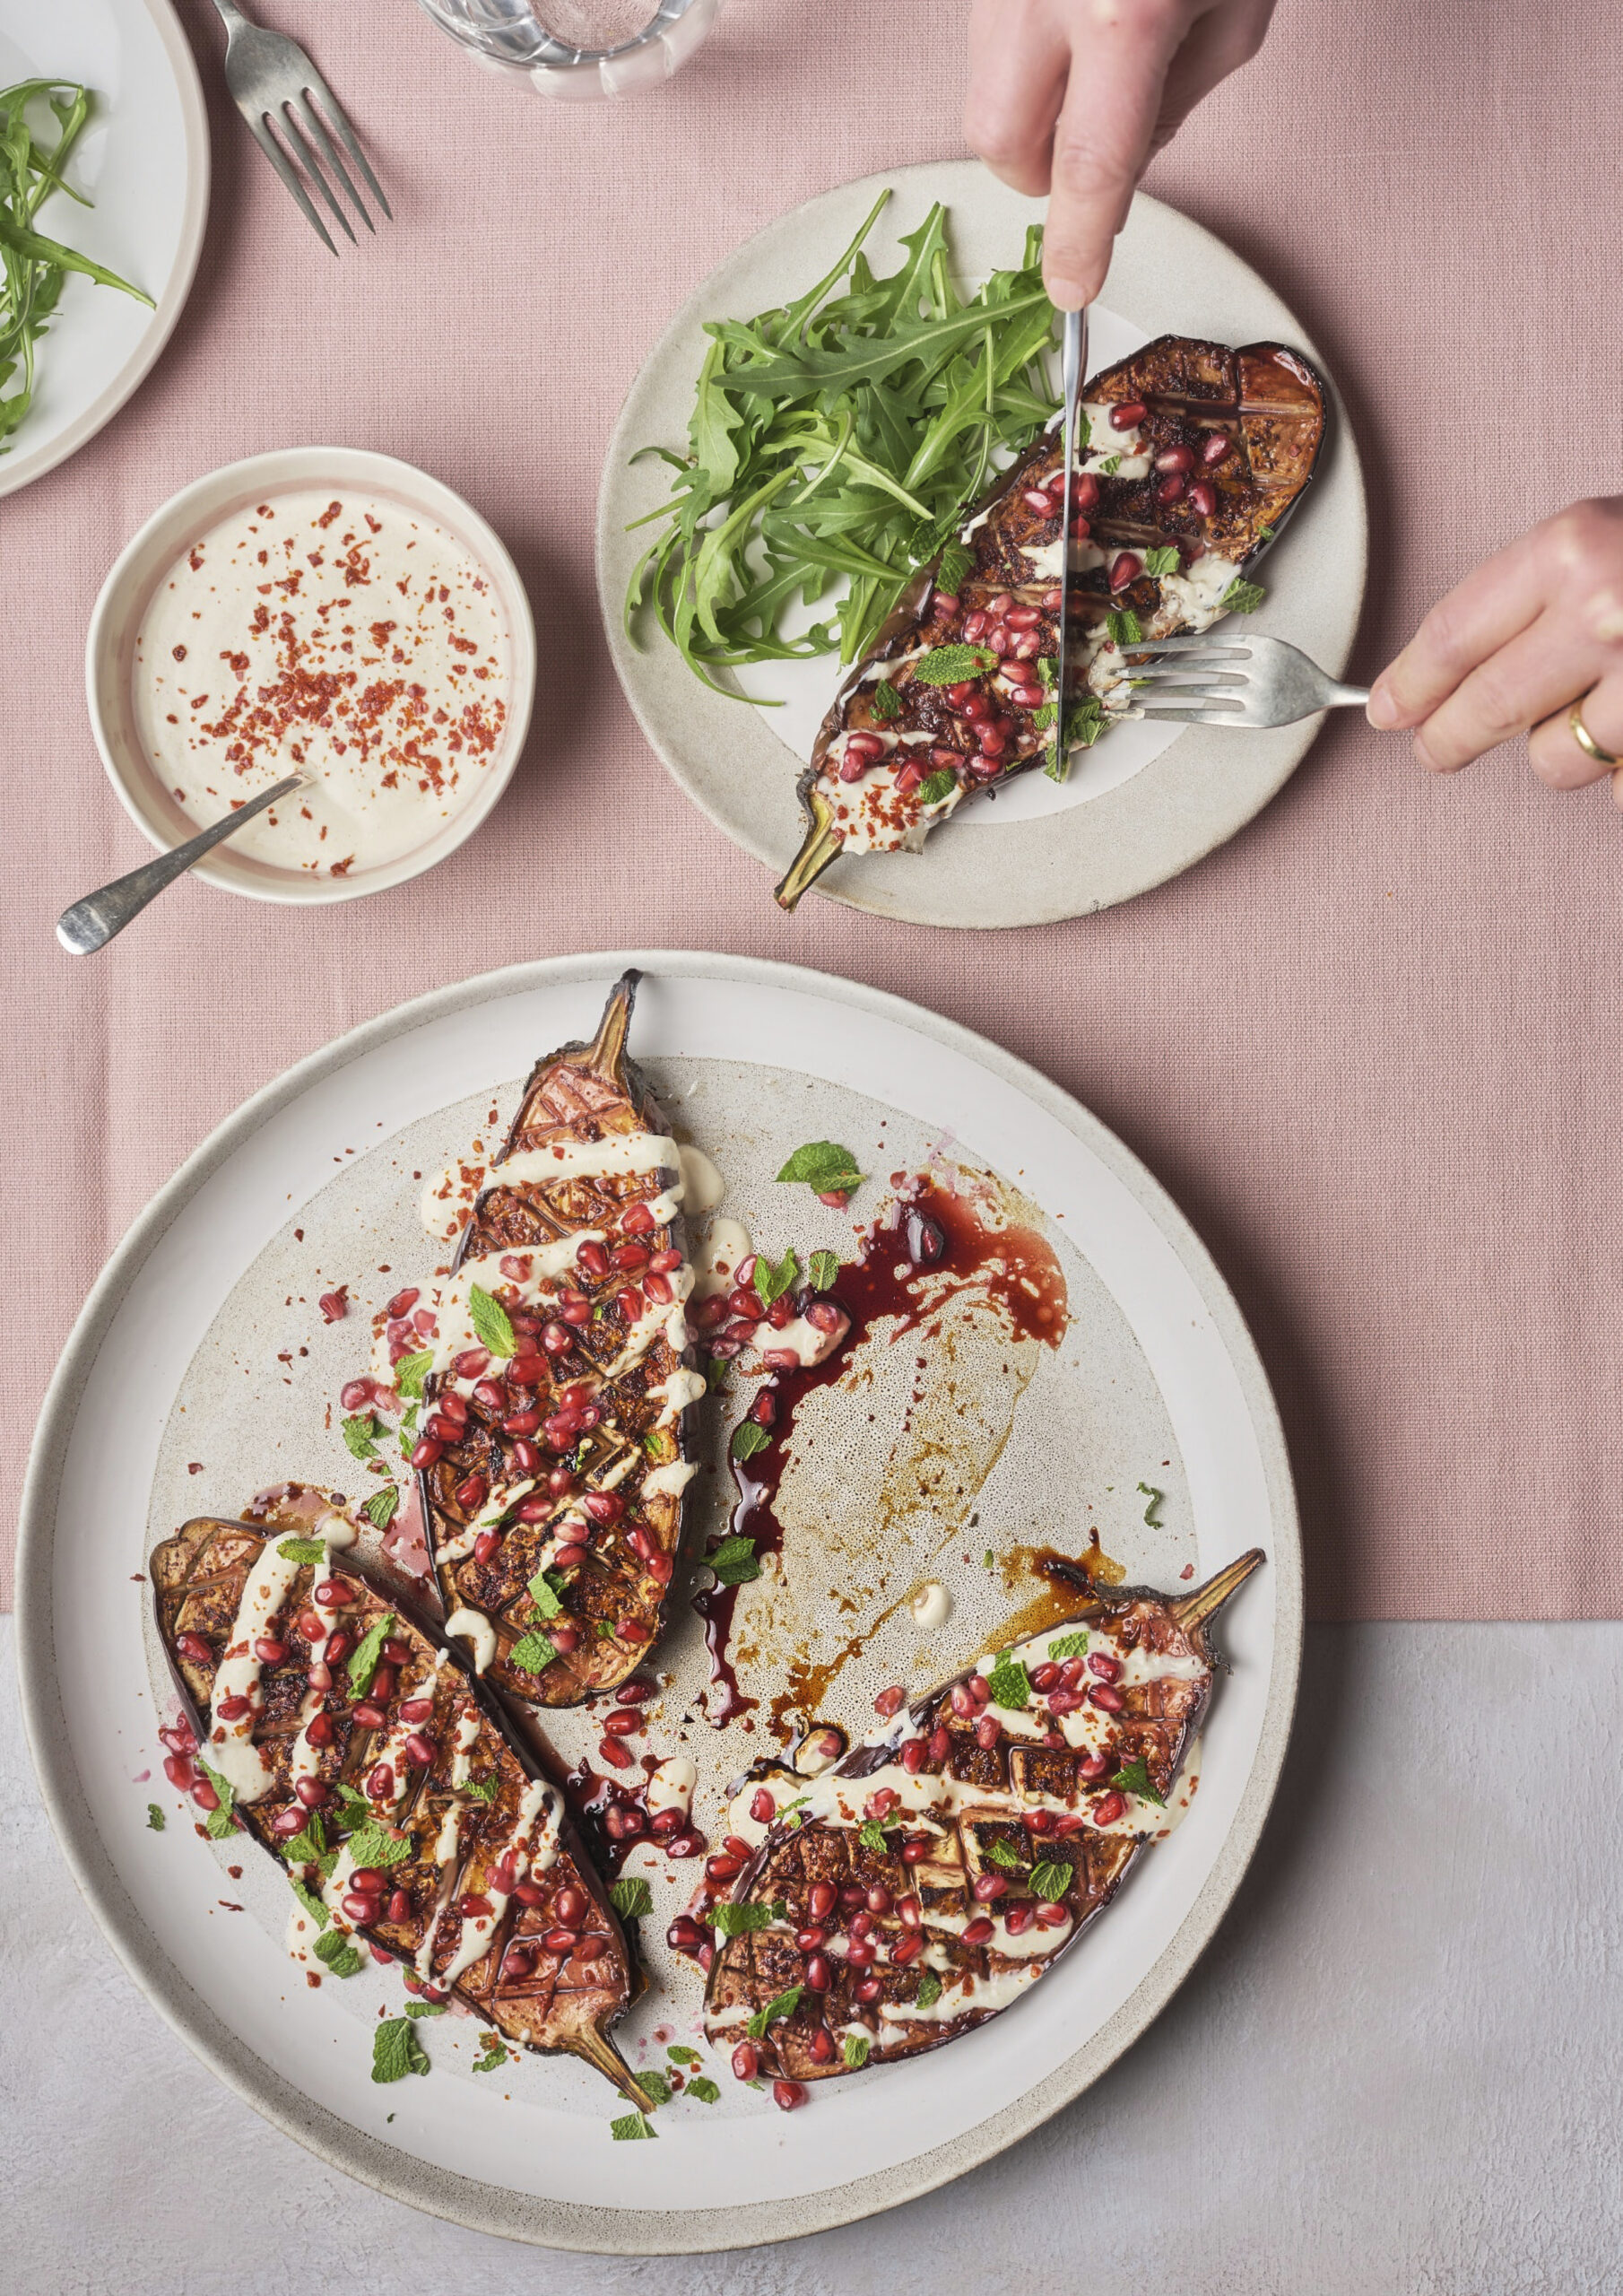 At The Kitchen | Roasted Aubergine with Pomegranate